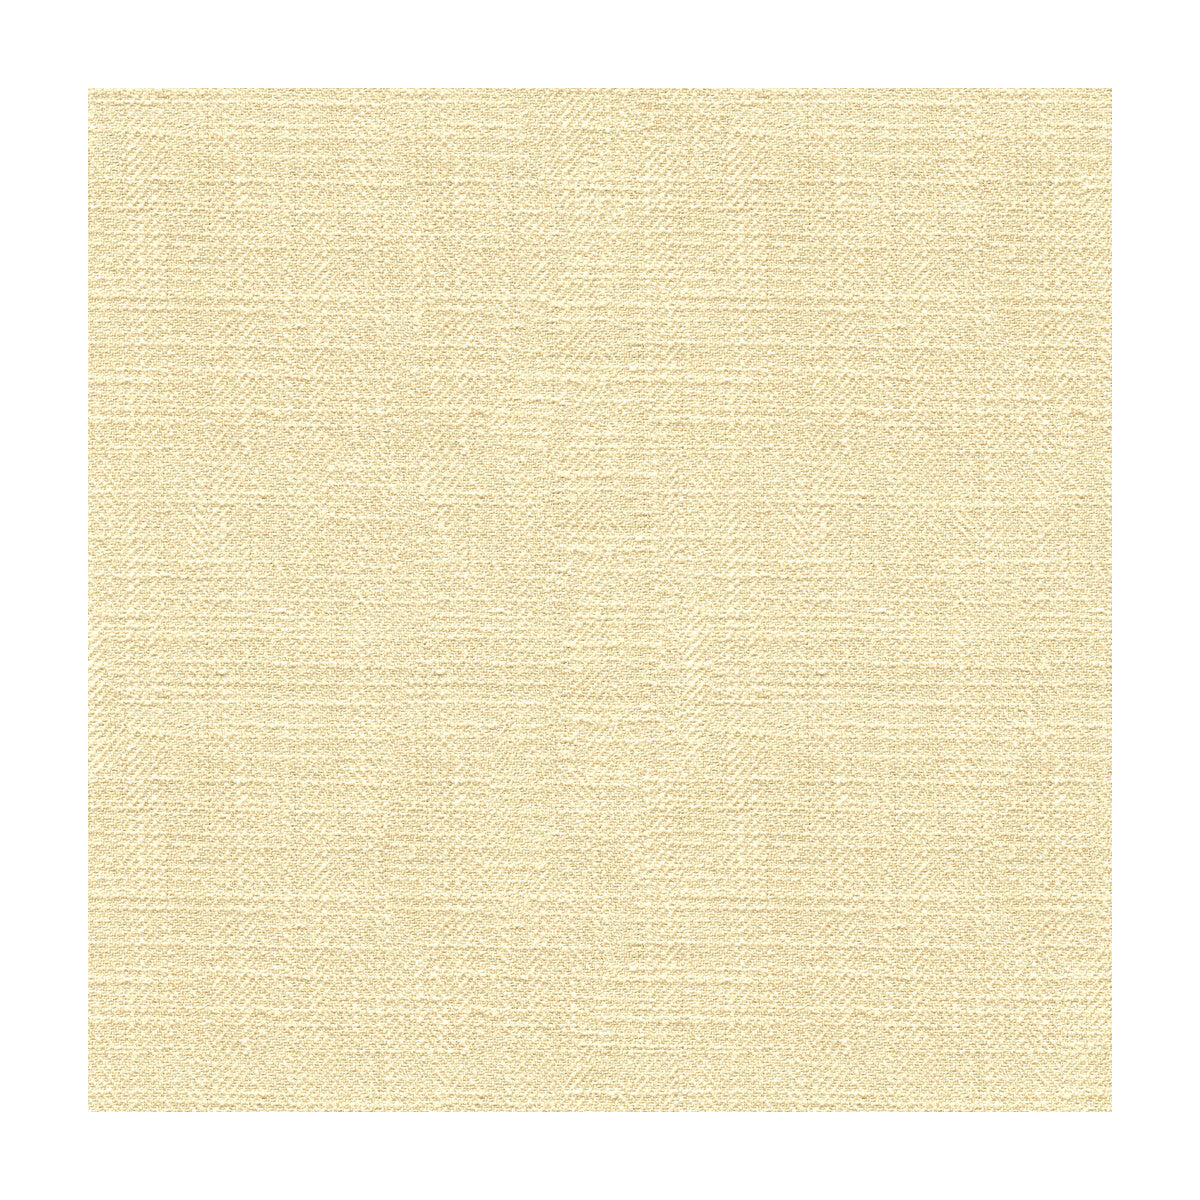 Kravet Basics fabric in 33842-1121 color - pattern 33842.1121.0 - by Kravet Basics in the Perfect Plains collection